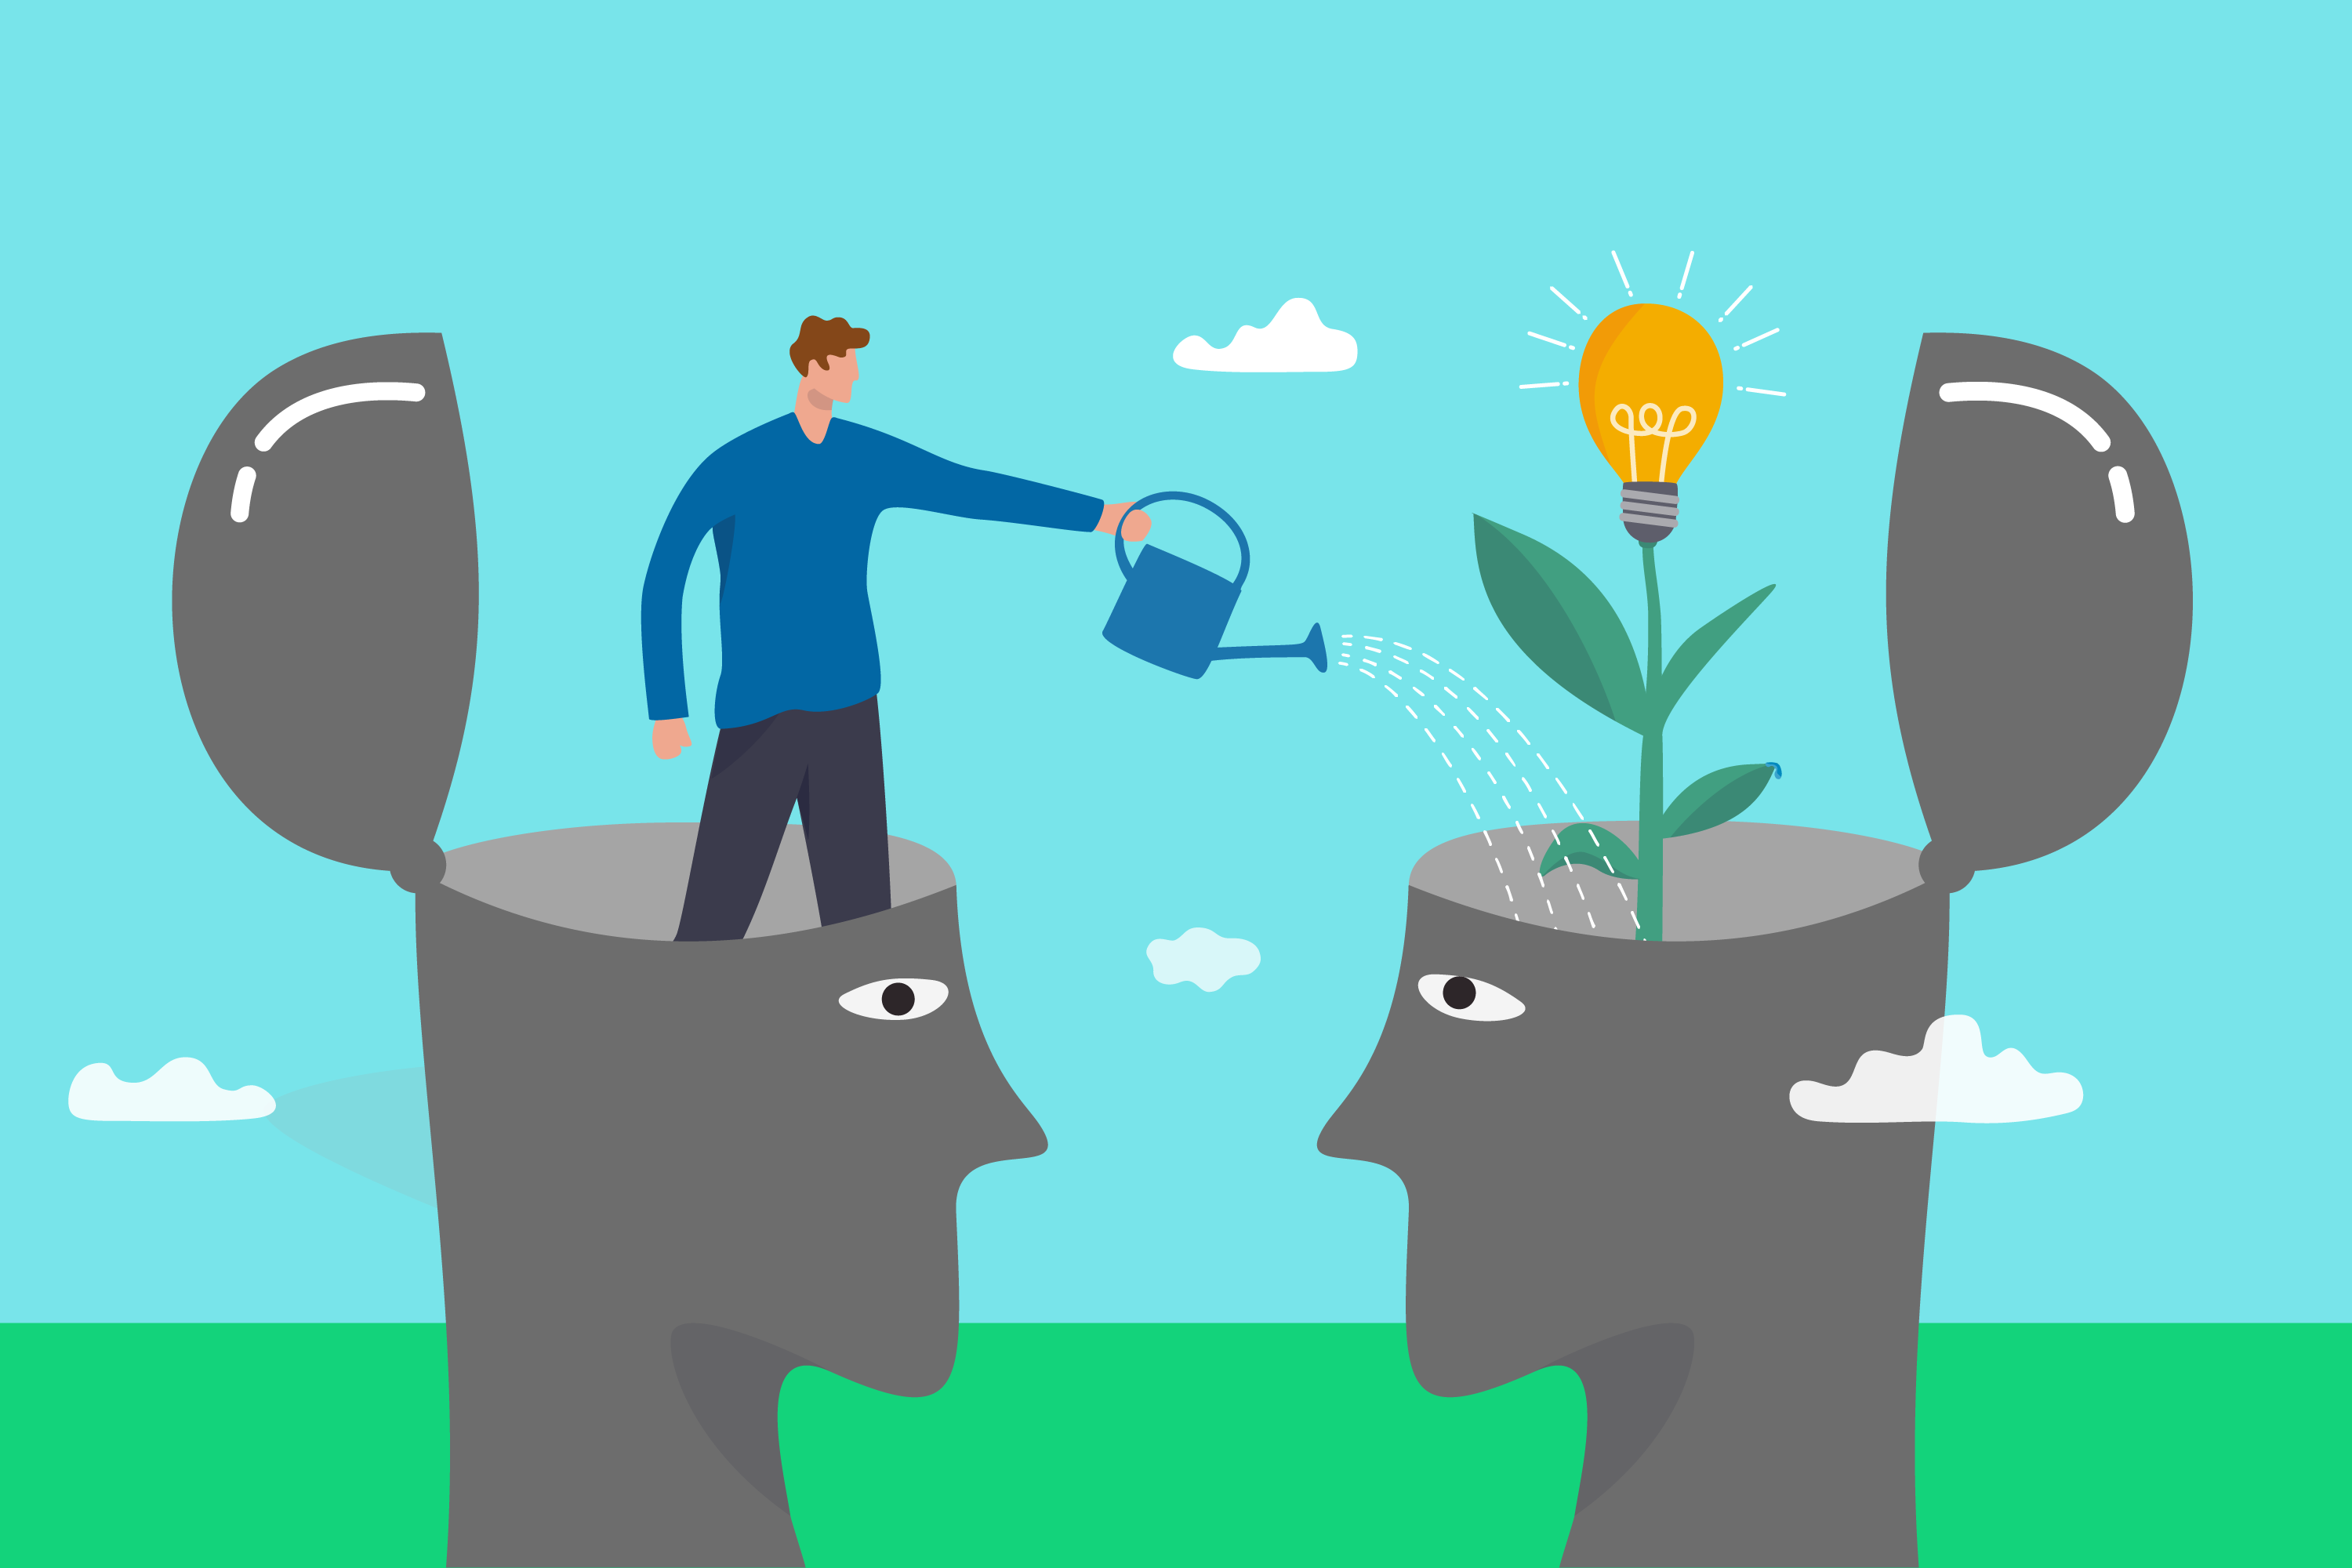 Illustration of man watering a mind with a light bulb growing out. Meant to explain "what is coaching?"